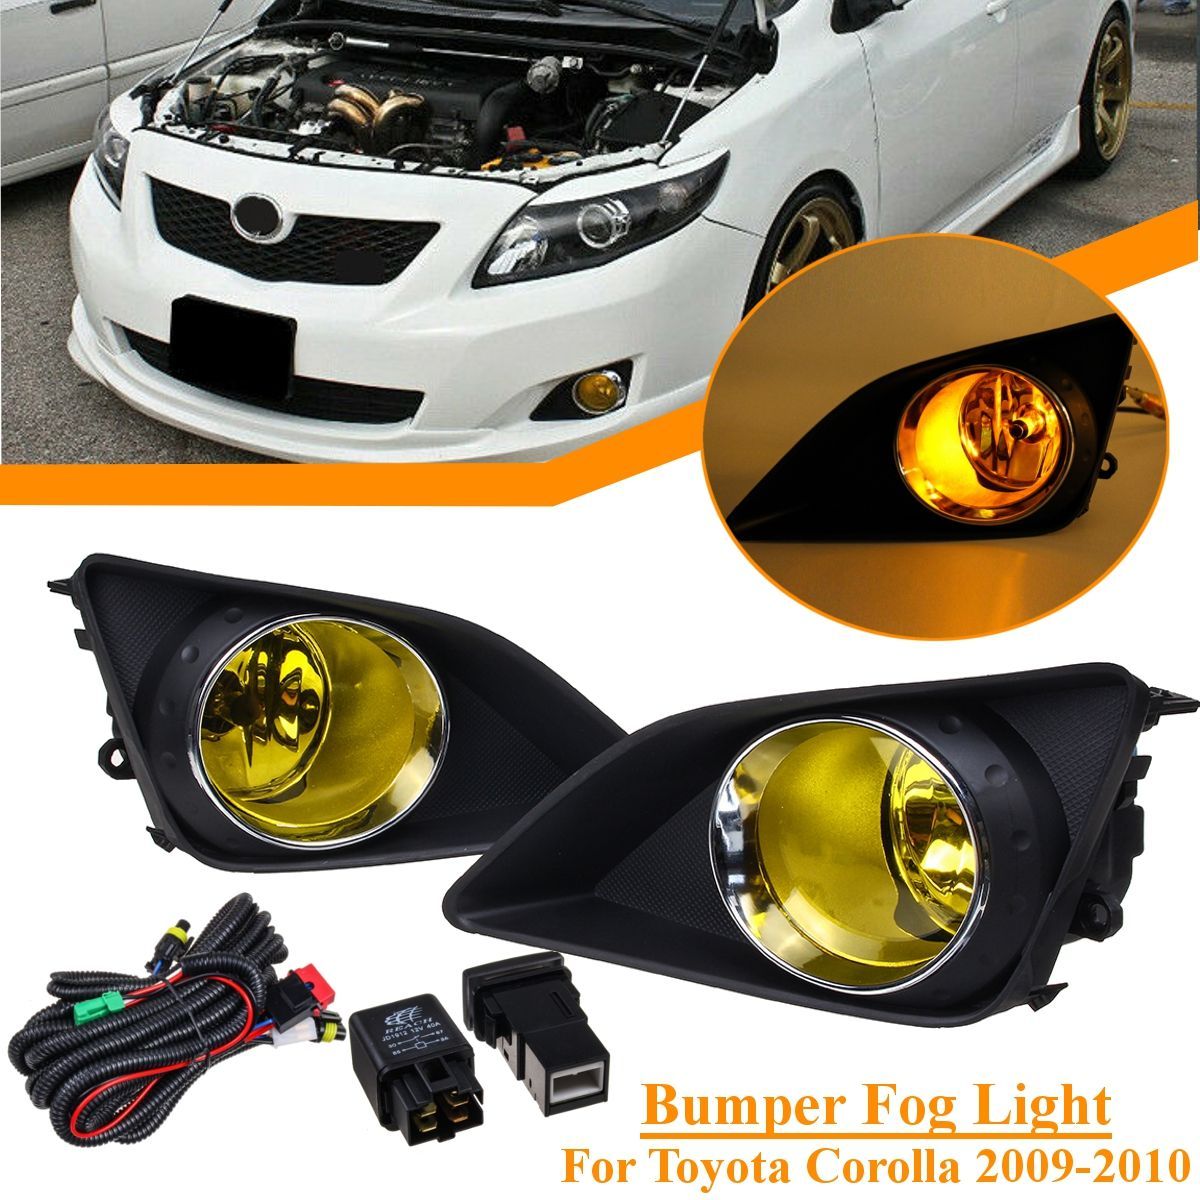 Car-Front-Bumper-Fog-Lights-Lamp-with-Cover-Bulbs-Harness-Kit-For-Toyota-Corolla-2009-2010-1639314